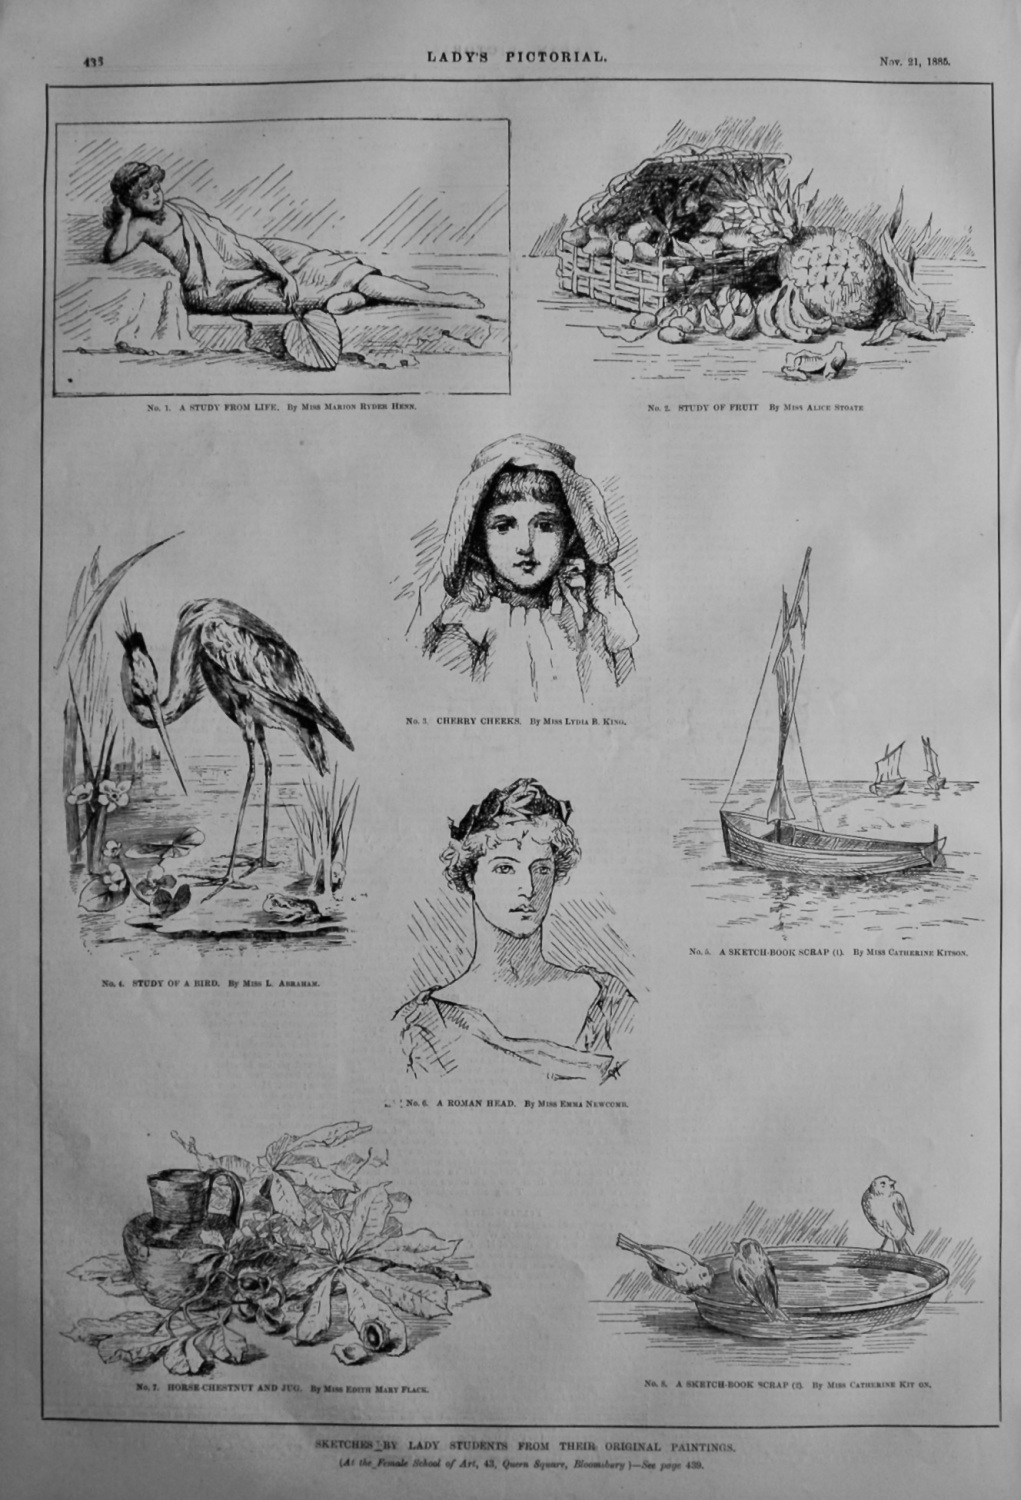 Sketches by Lady Students from their Original Paintings.  1885.